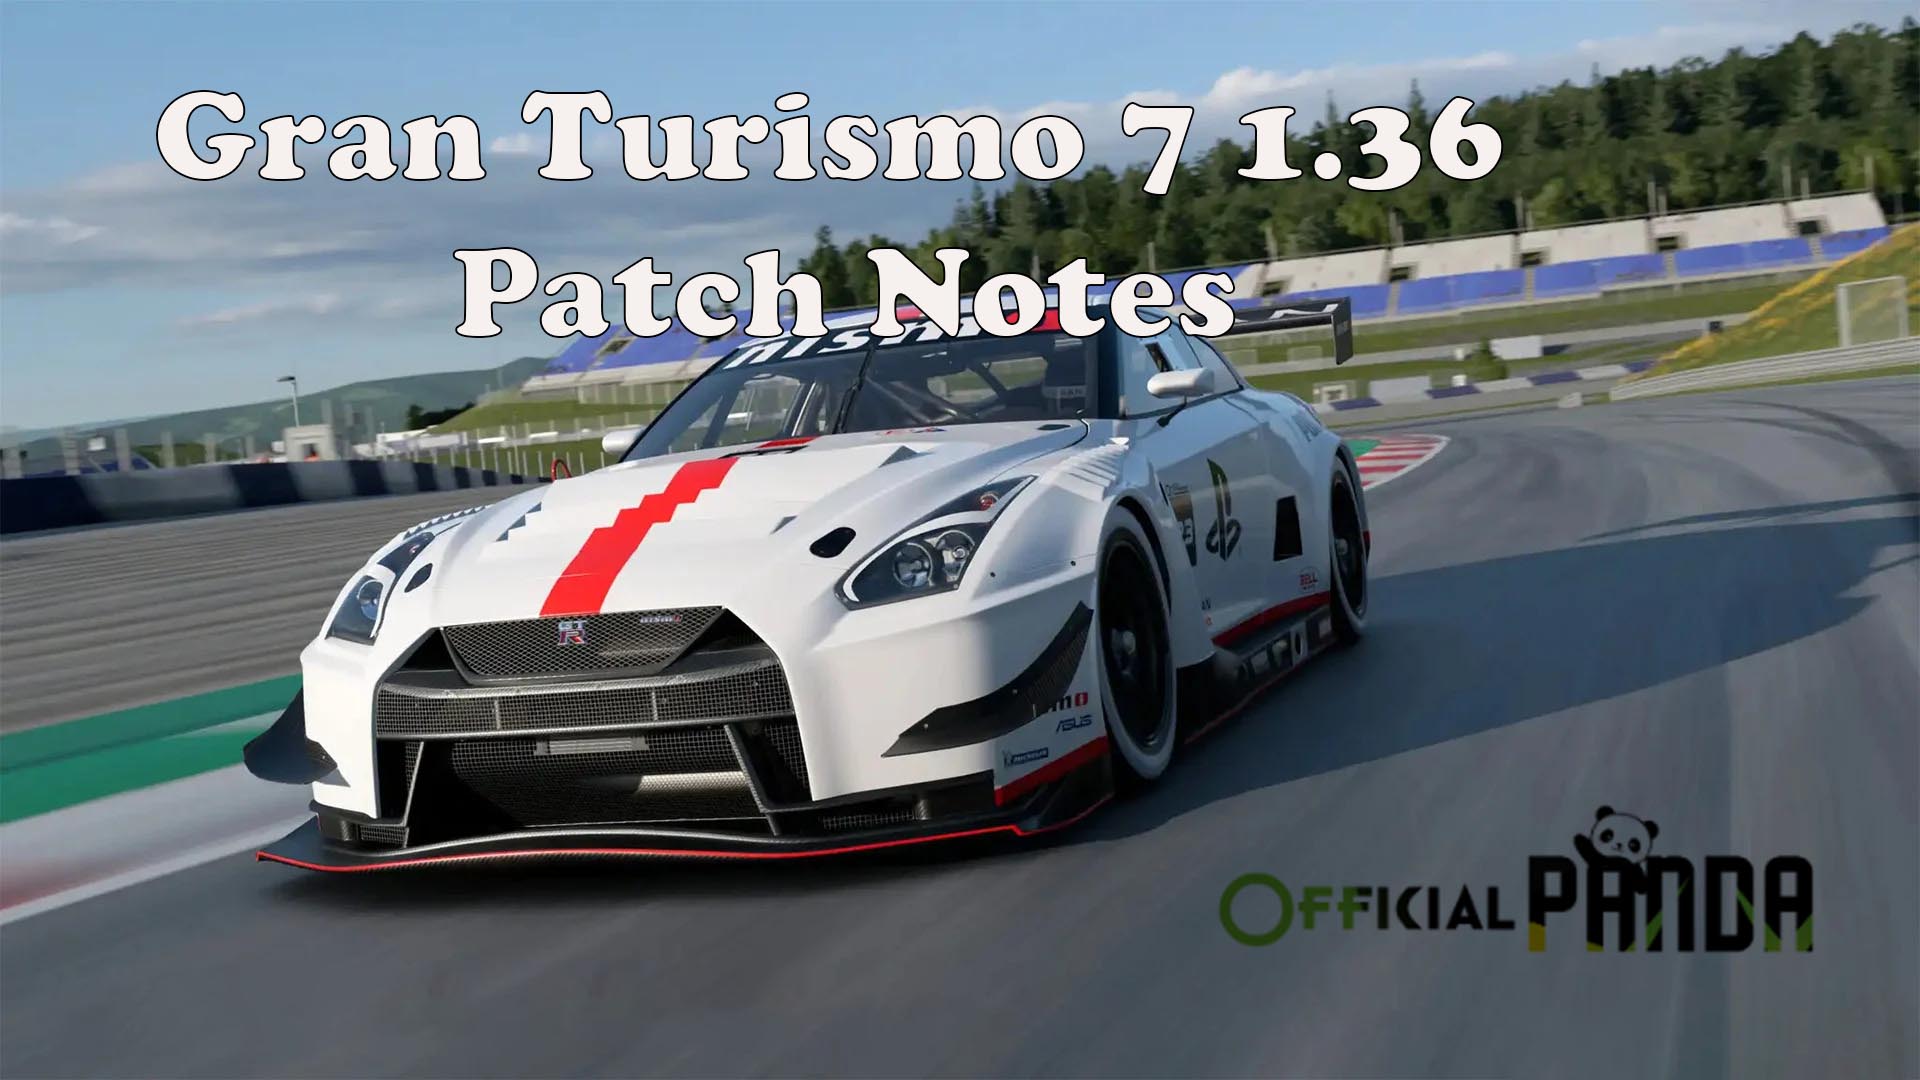 Gran Turismo 7 1.36 Patch Notes